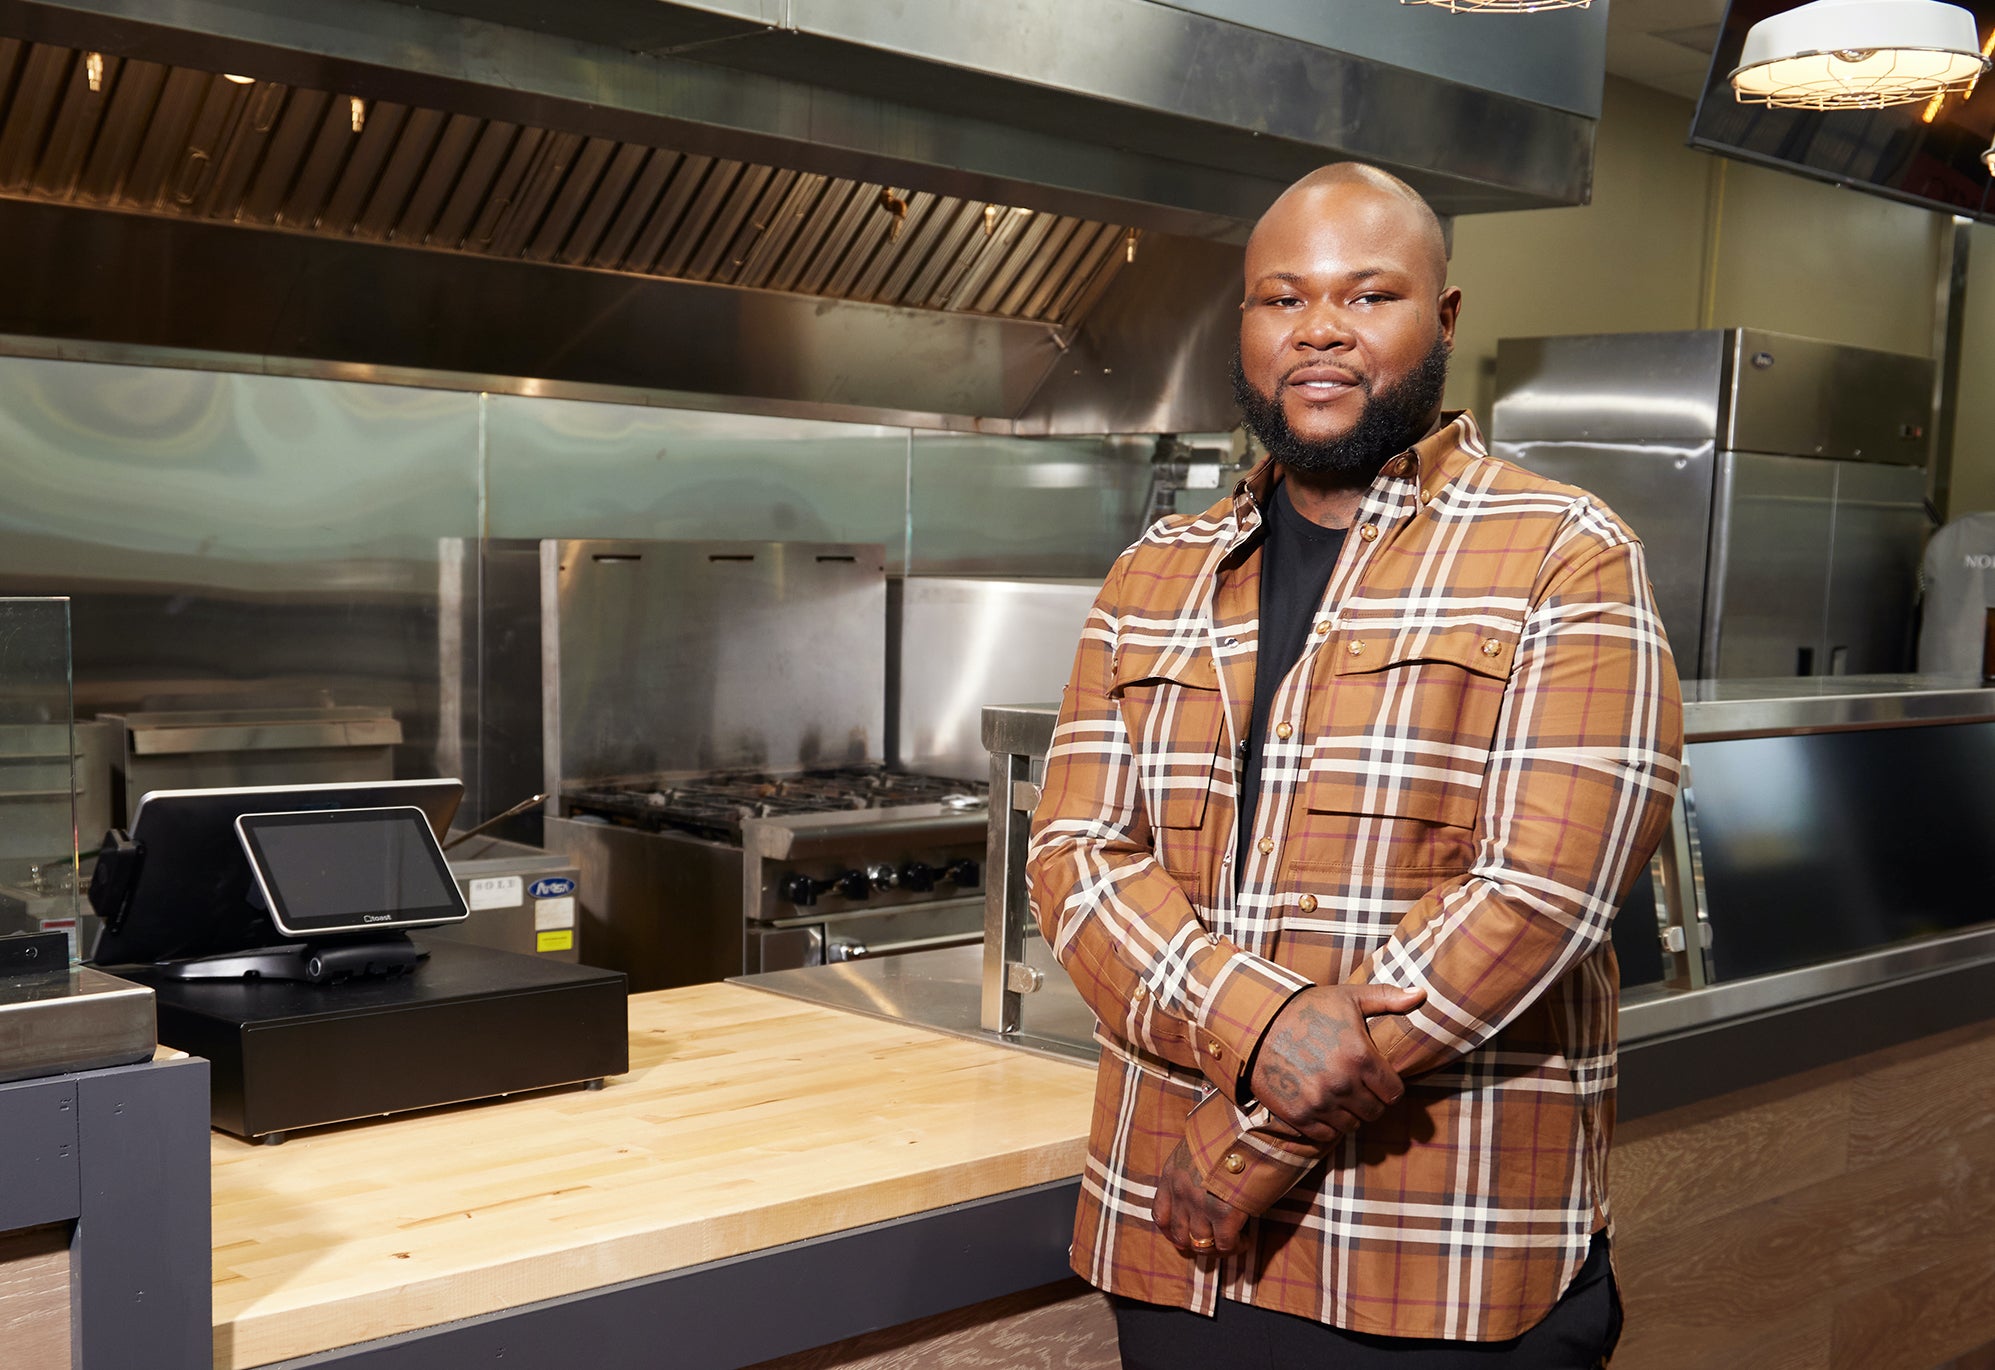 This Celebrity Chef Shares How He Went From Being Scammed To Opening A Successful Restaurant